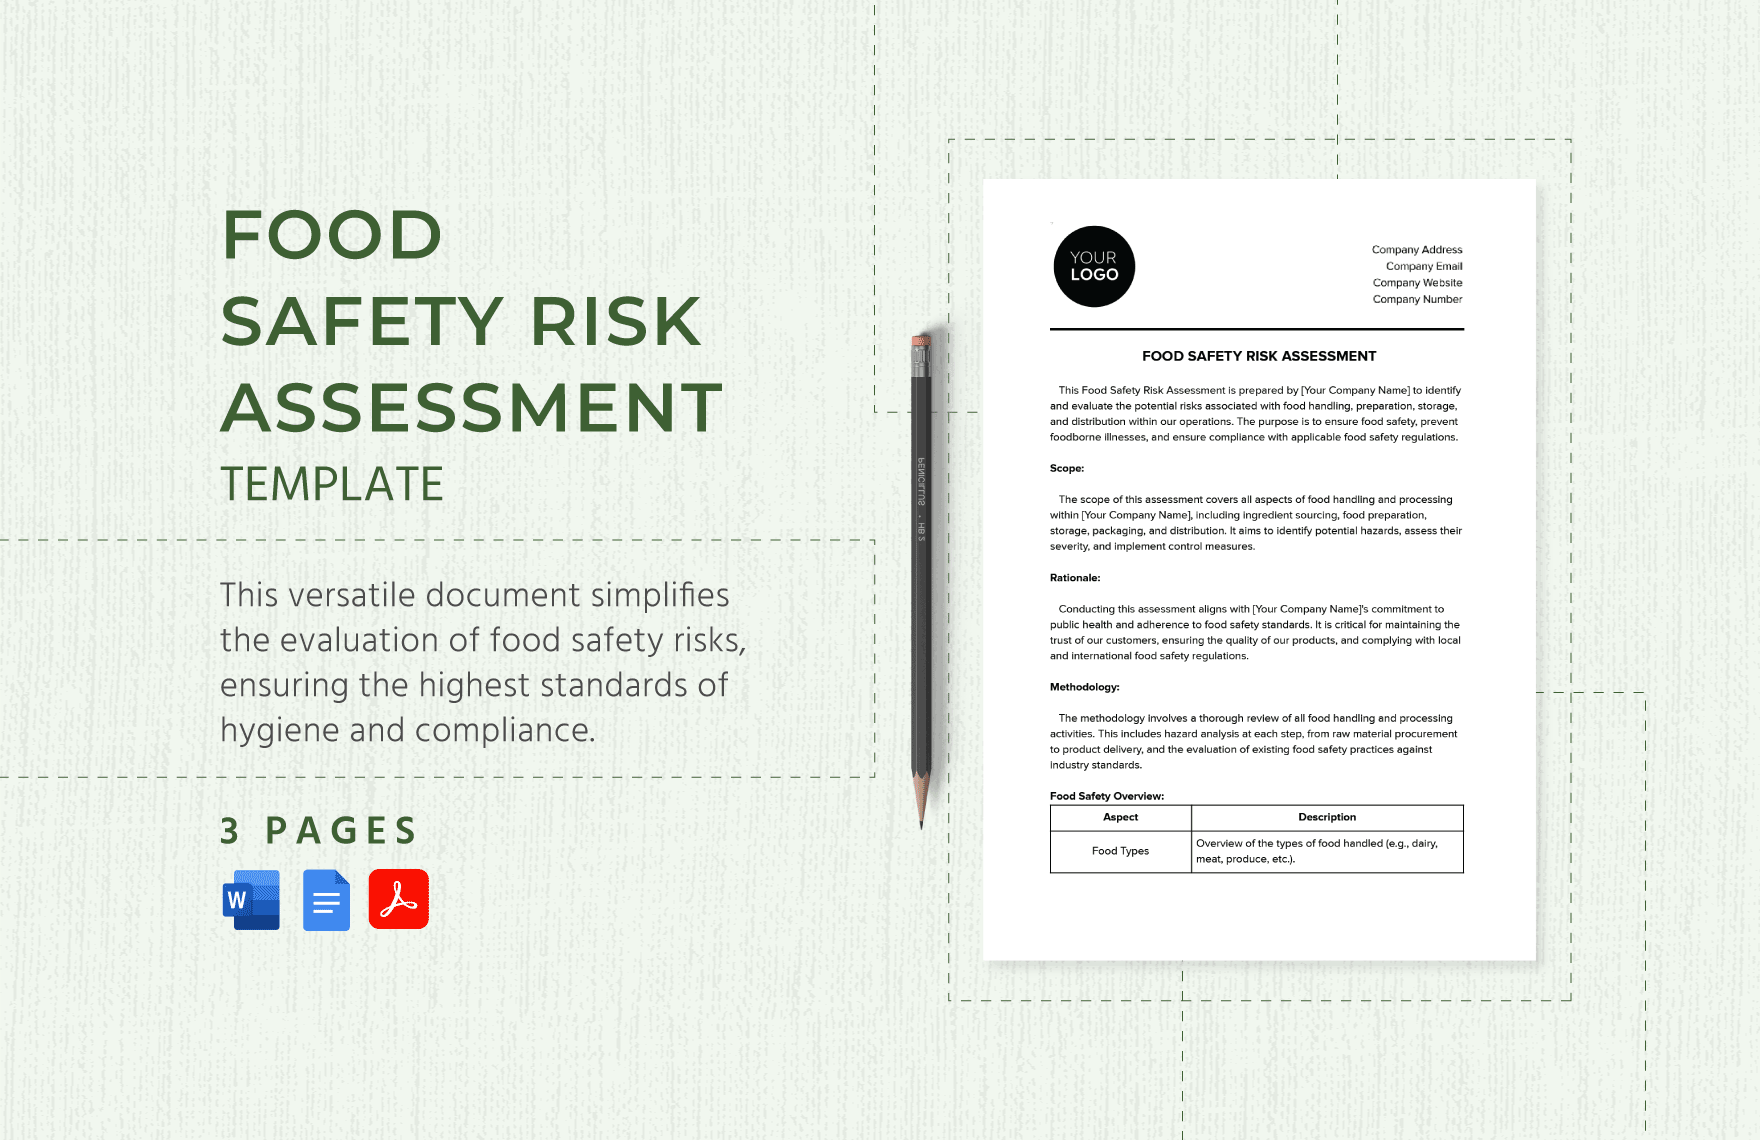 Food Safety Risk Assessment Template in Word, Google Docs, PDF